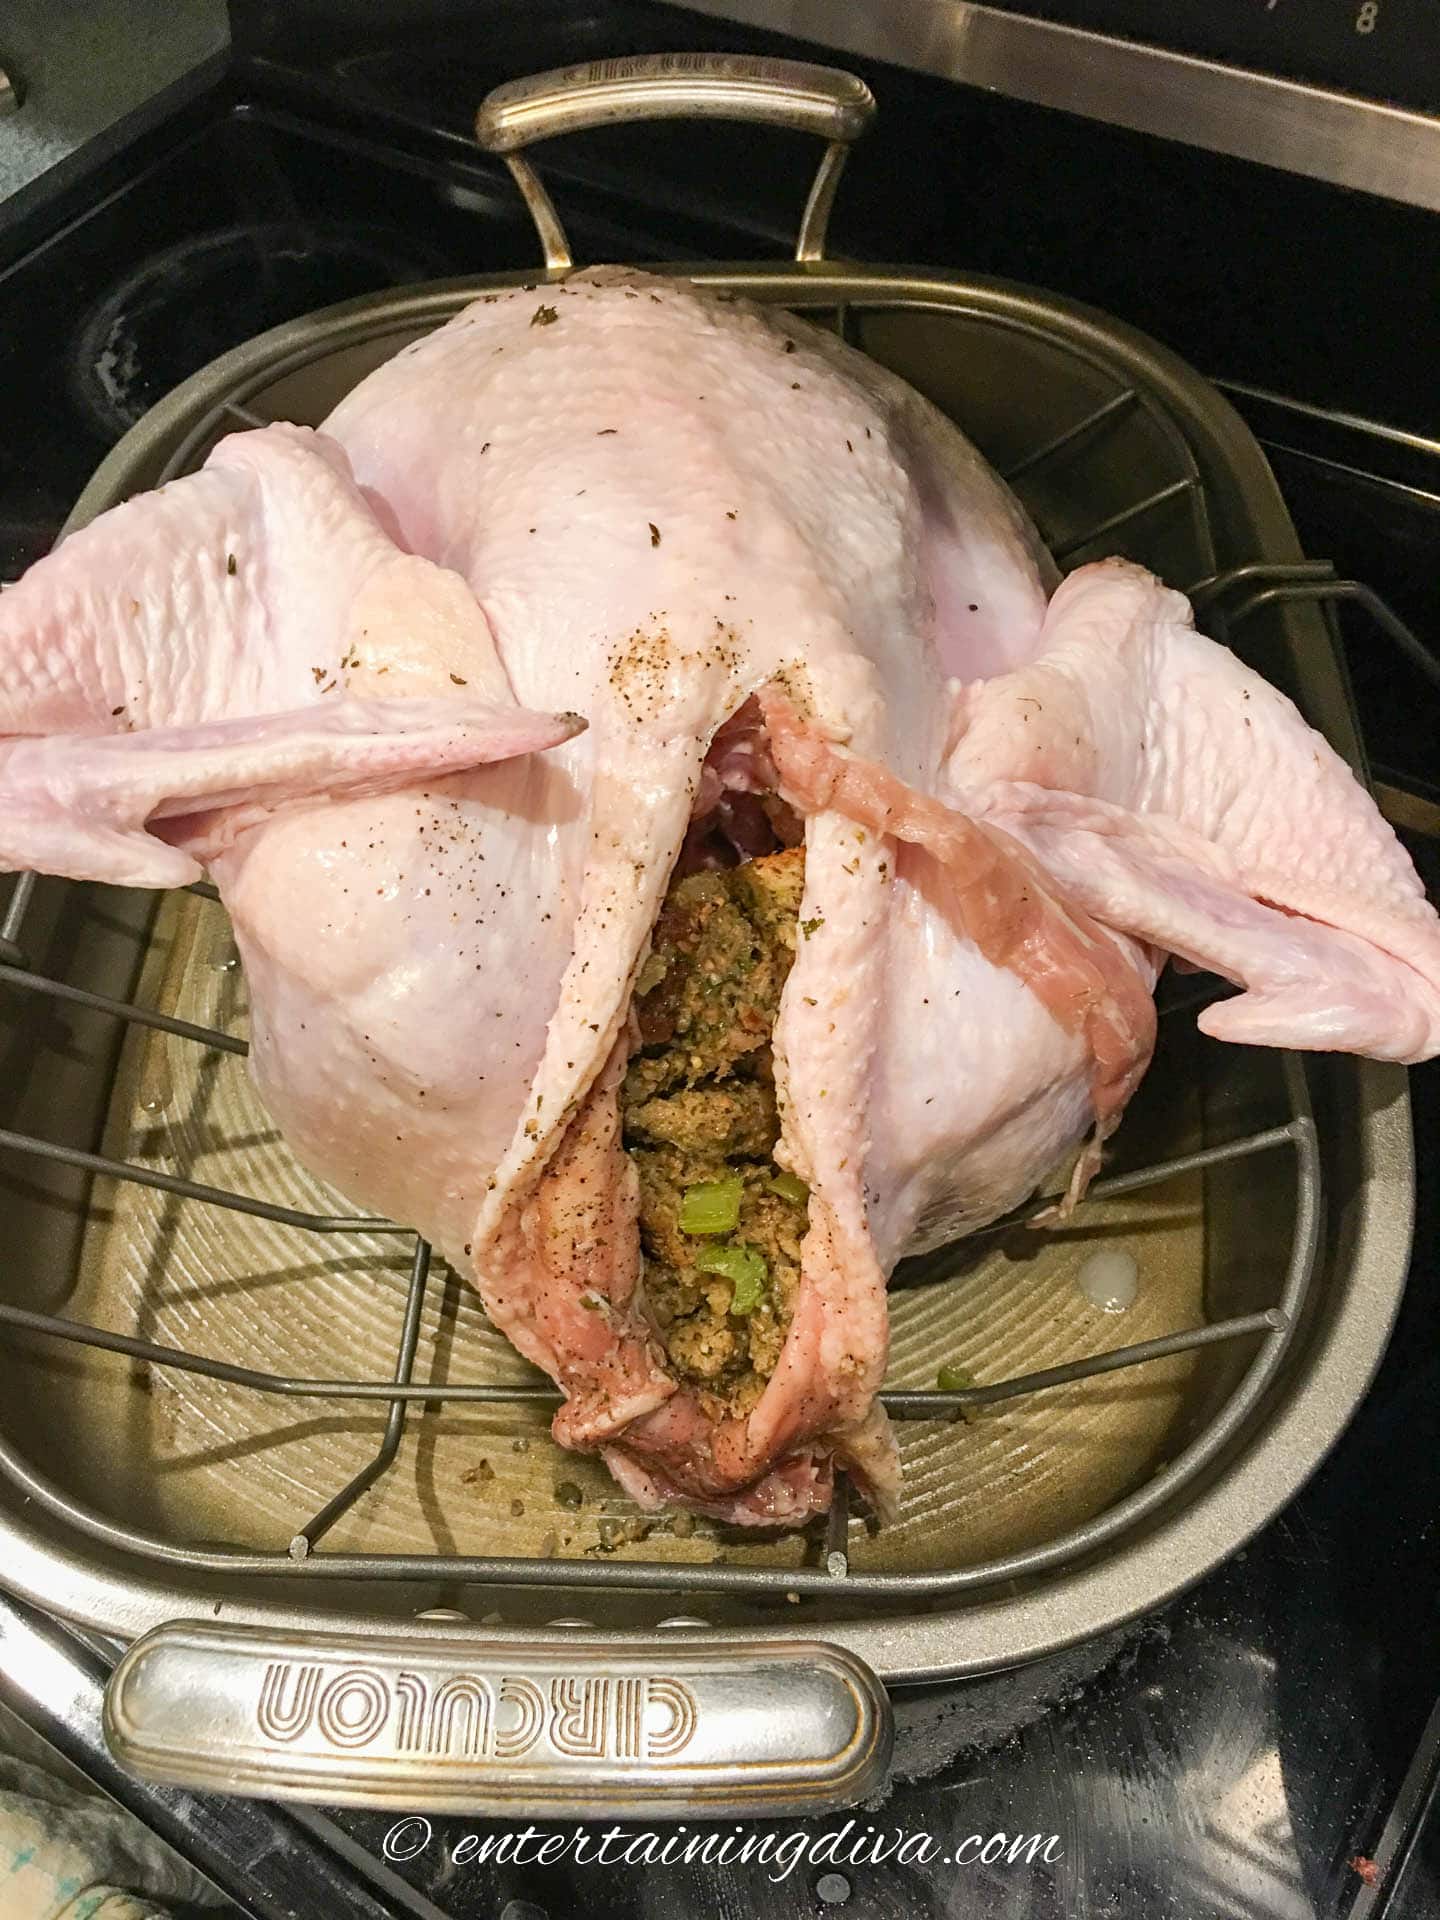 Turkey with old fashioned stuffing